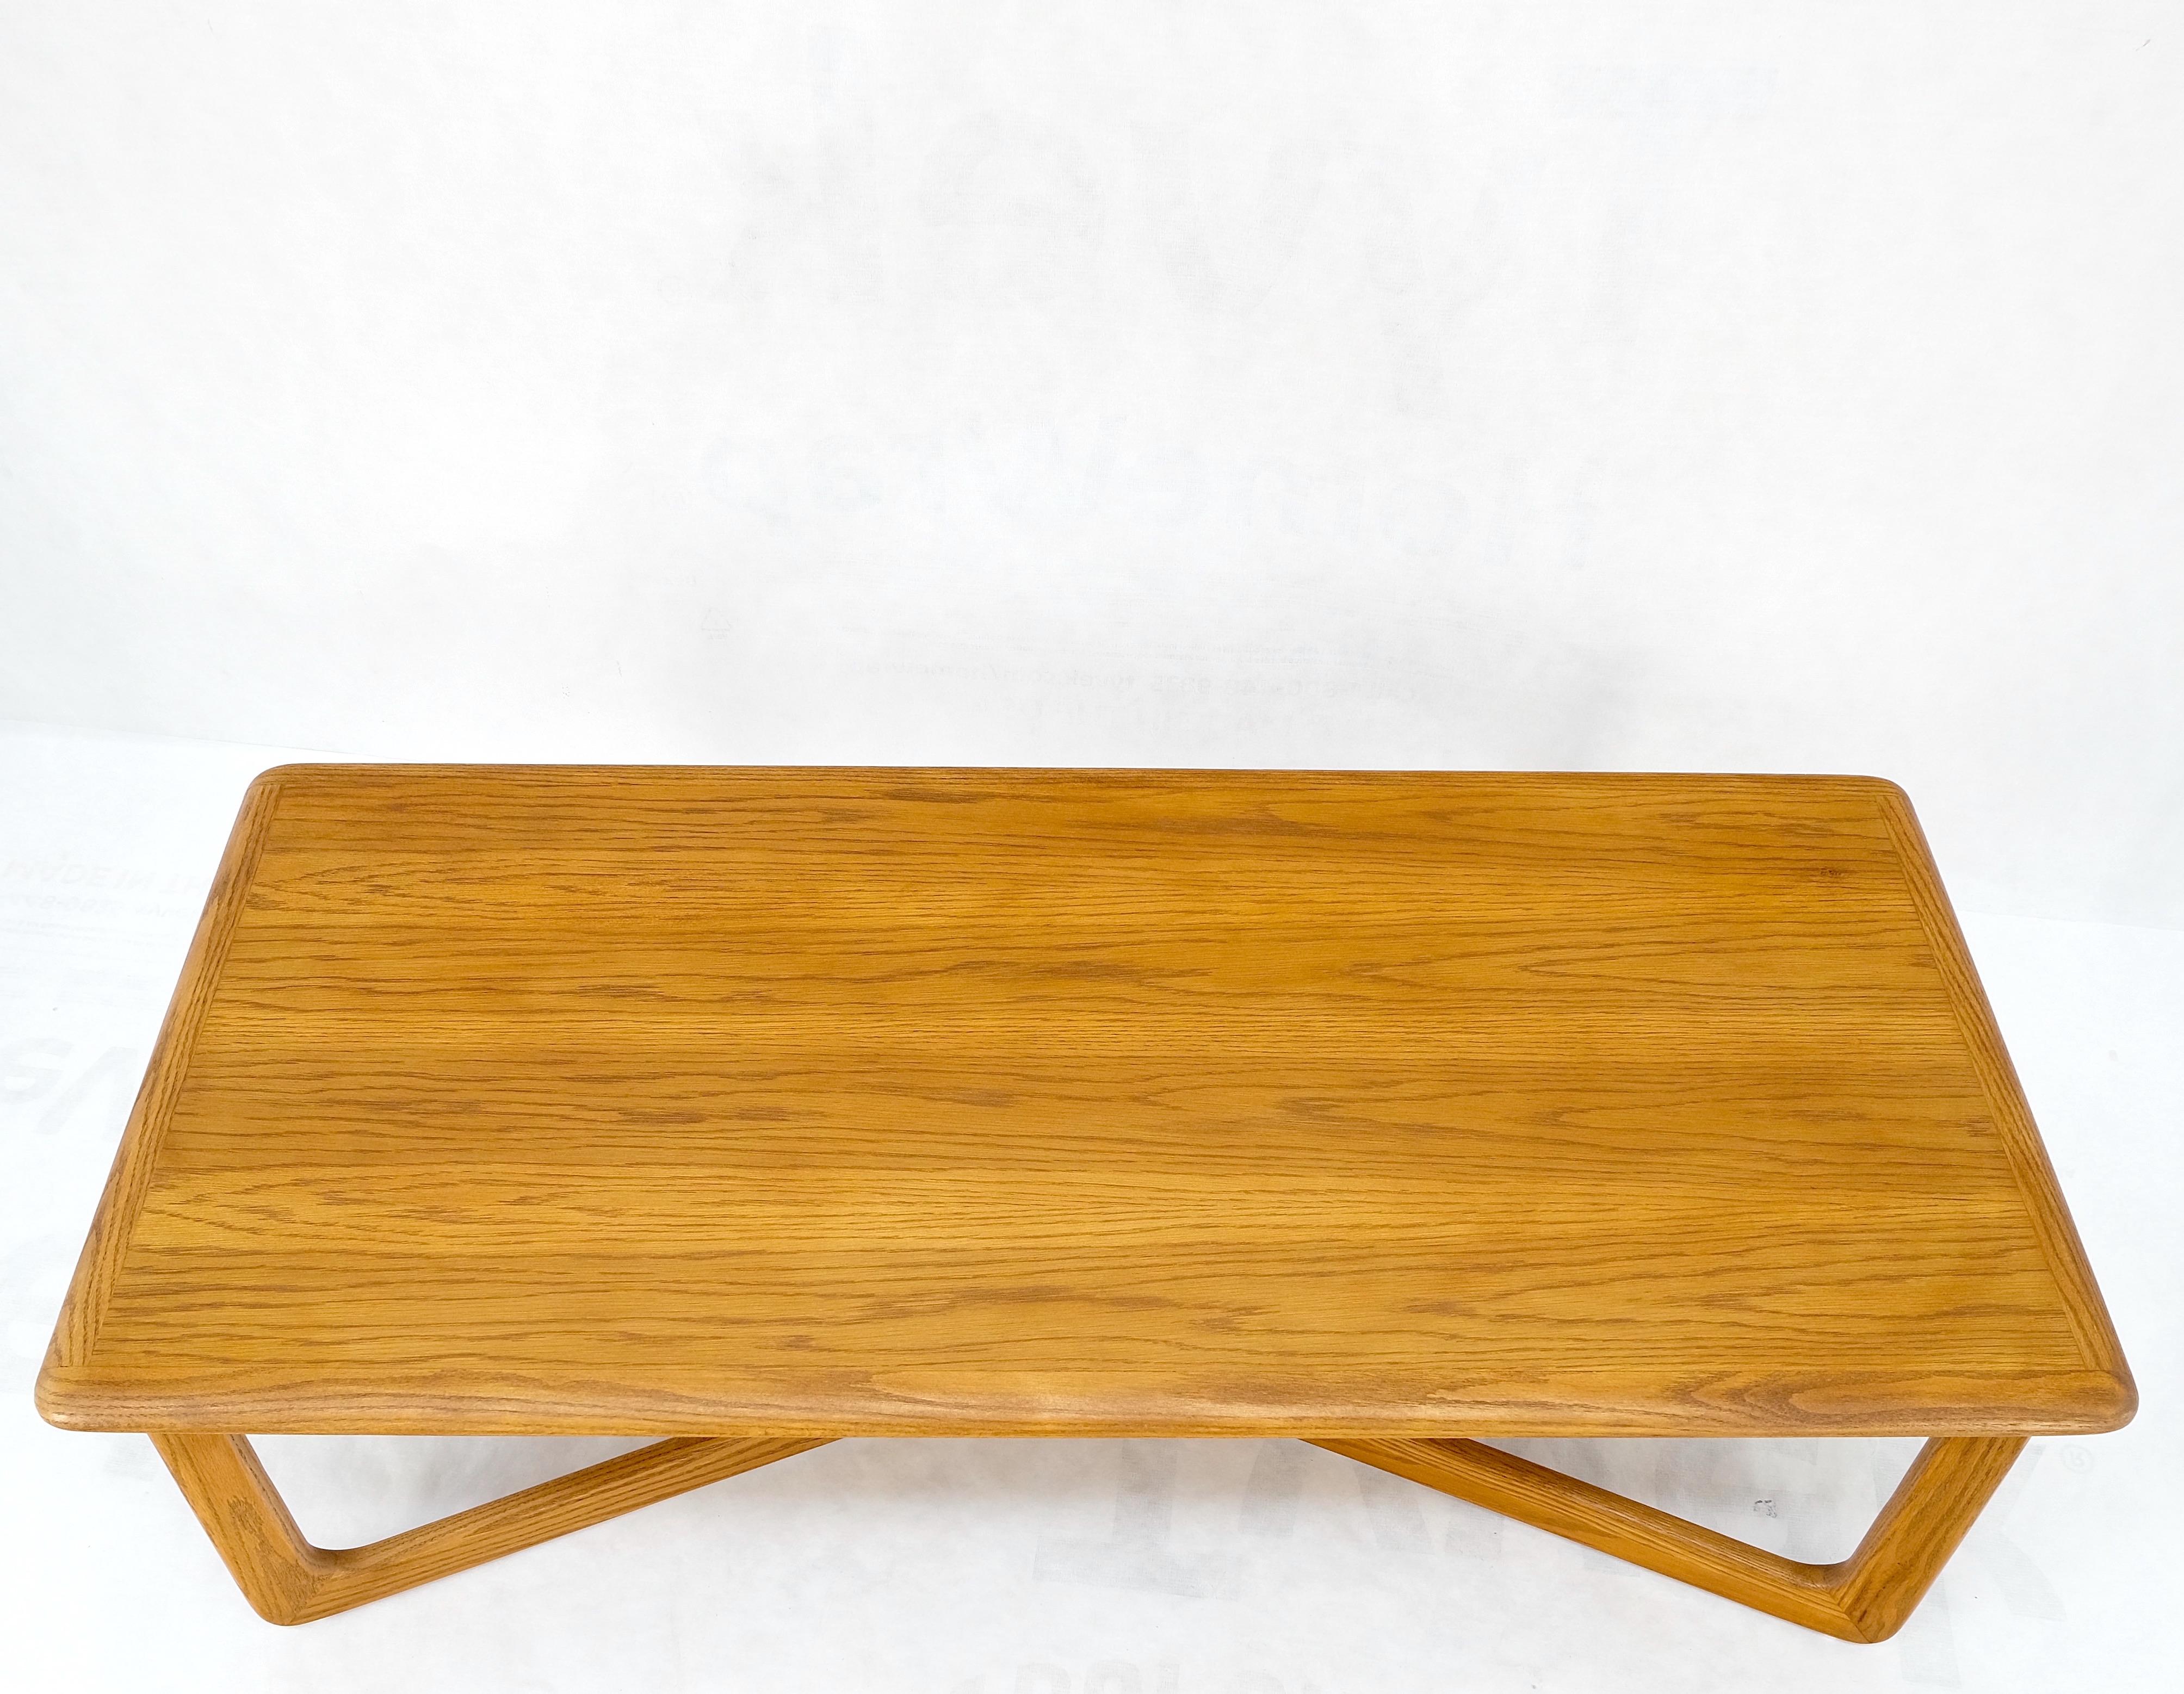 Restored X base rectangle chestnut coffee table by Lane Mid-Century Modern mint!